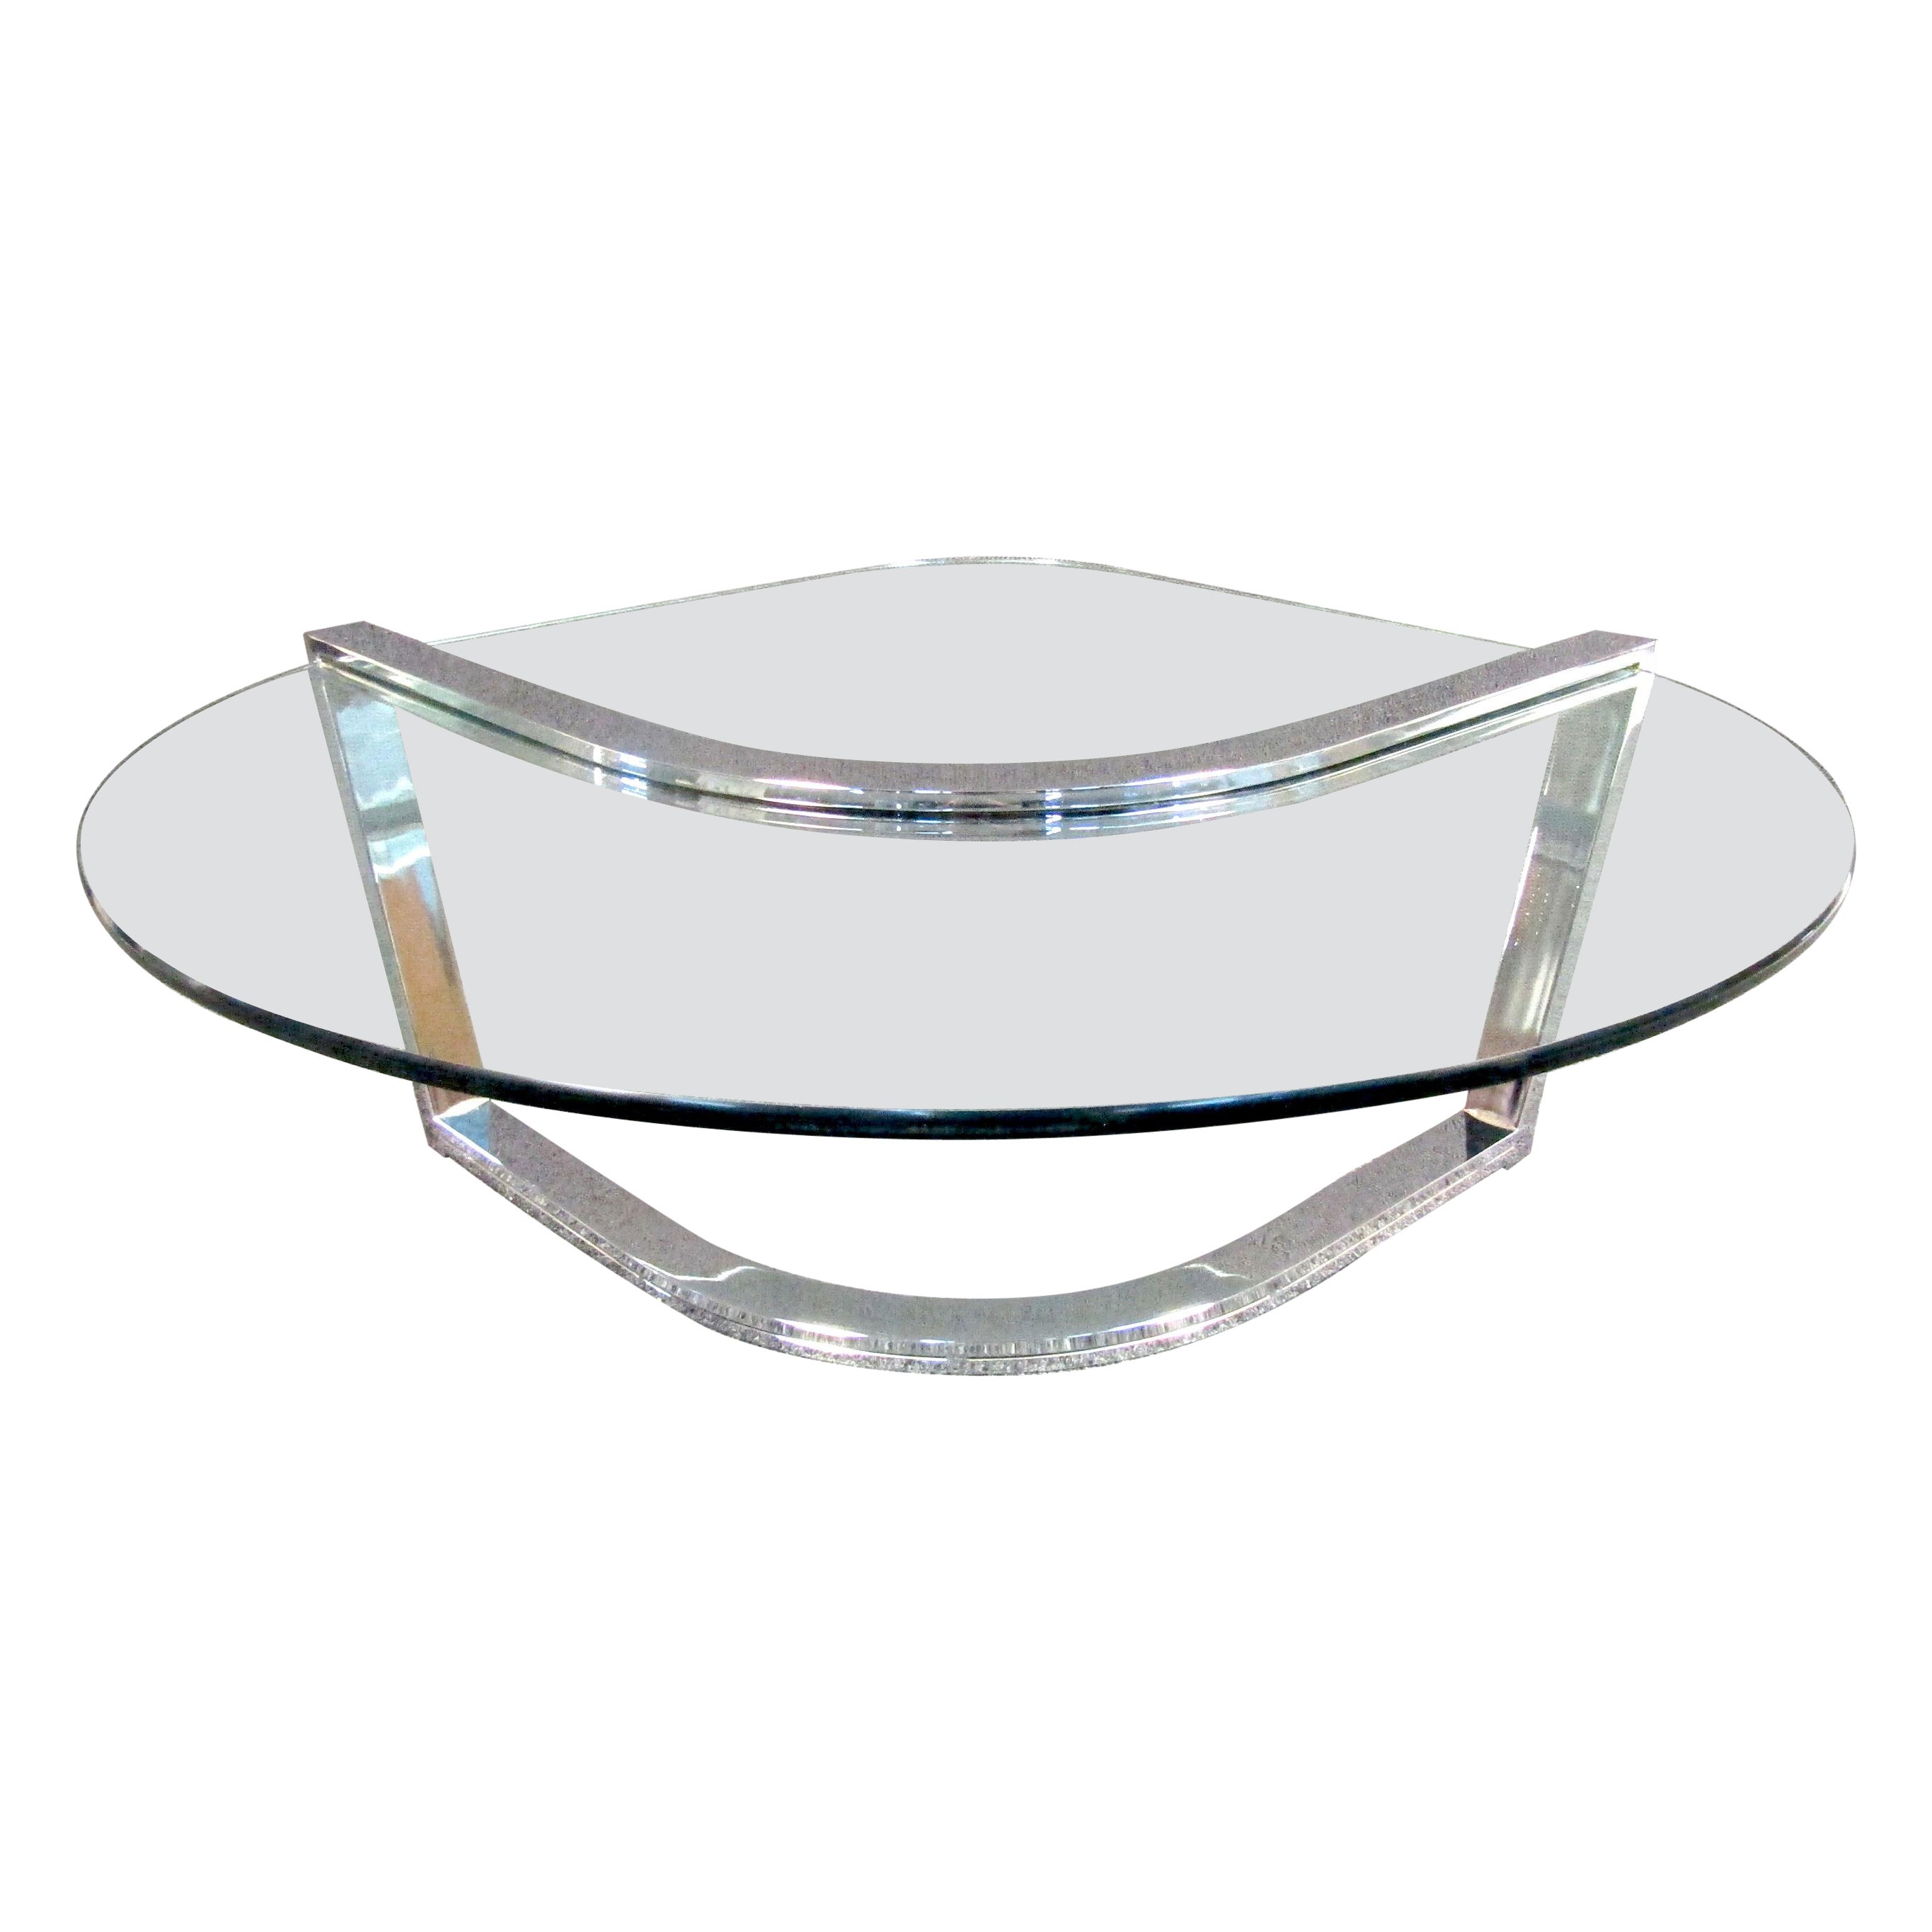 Vintage Modern Glass Coffee Table by Pace